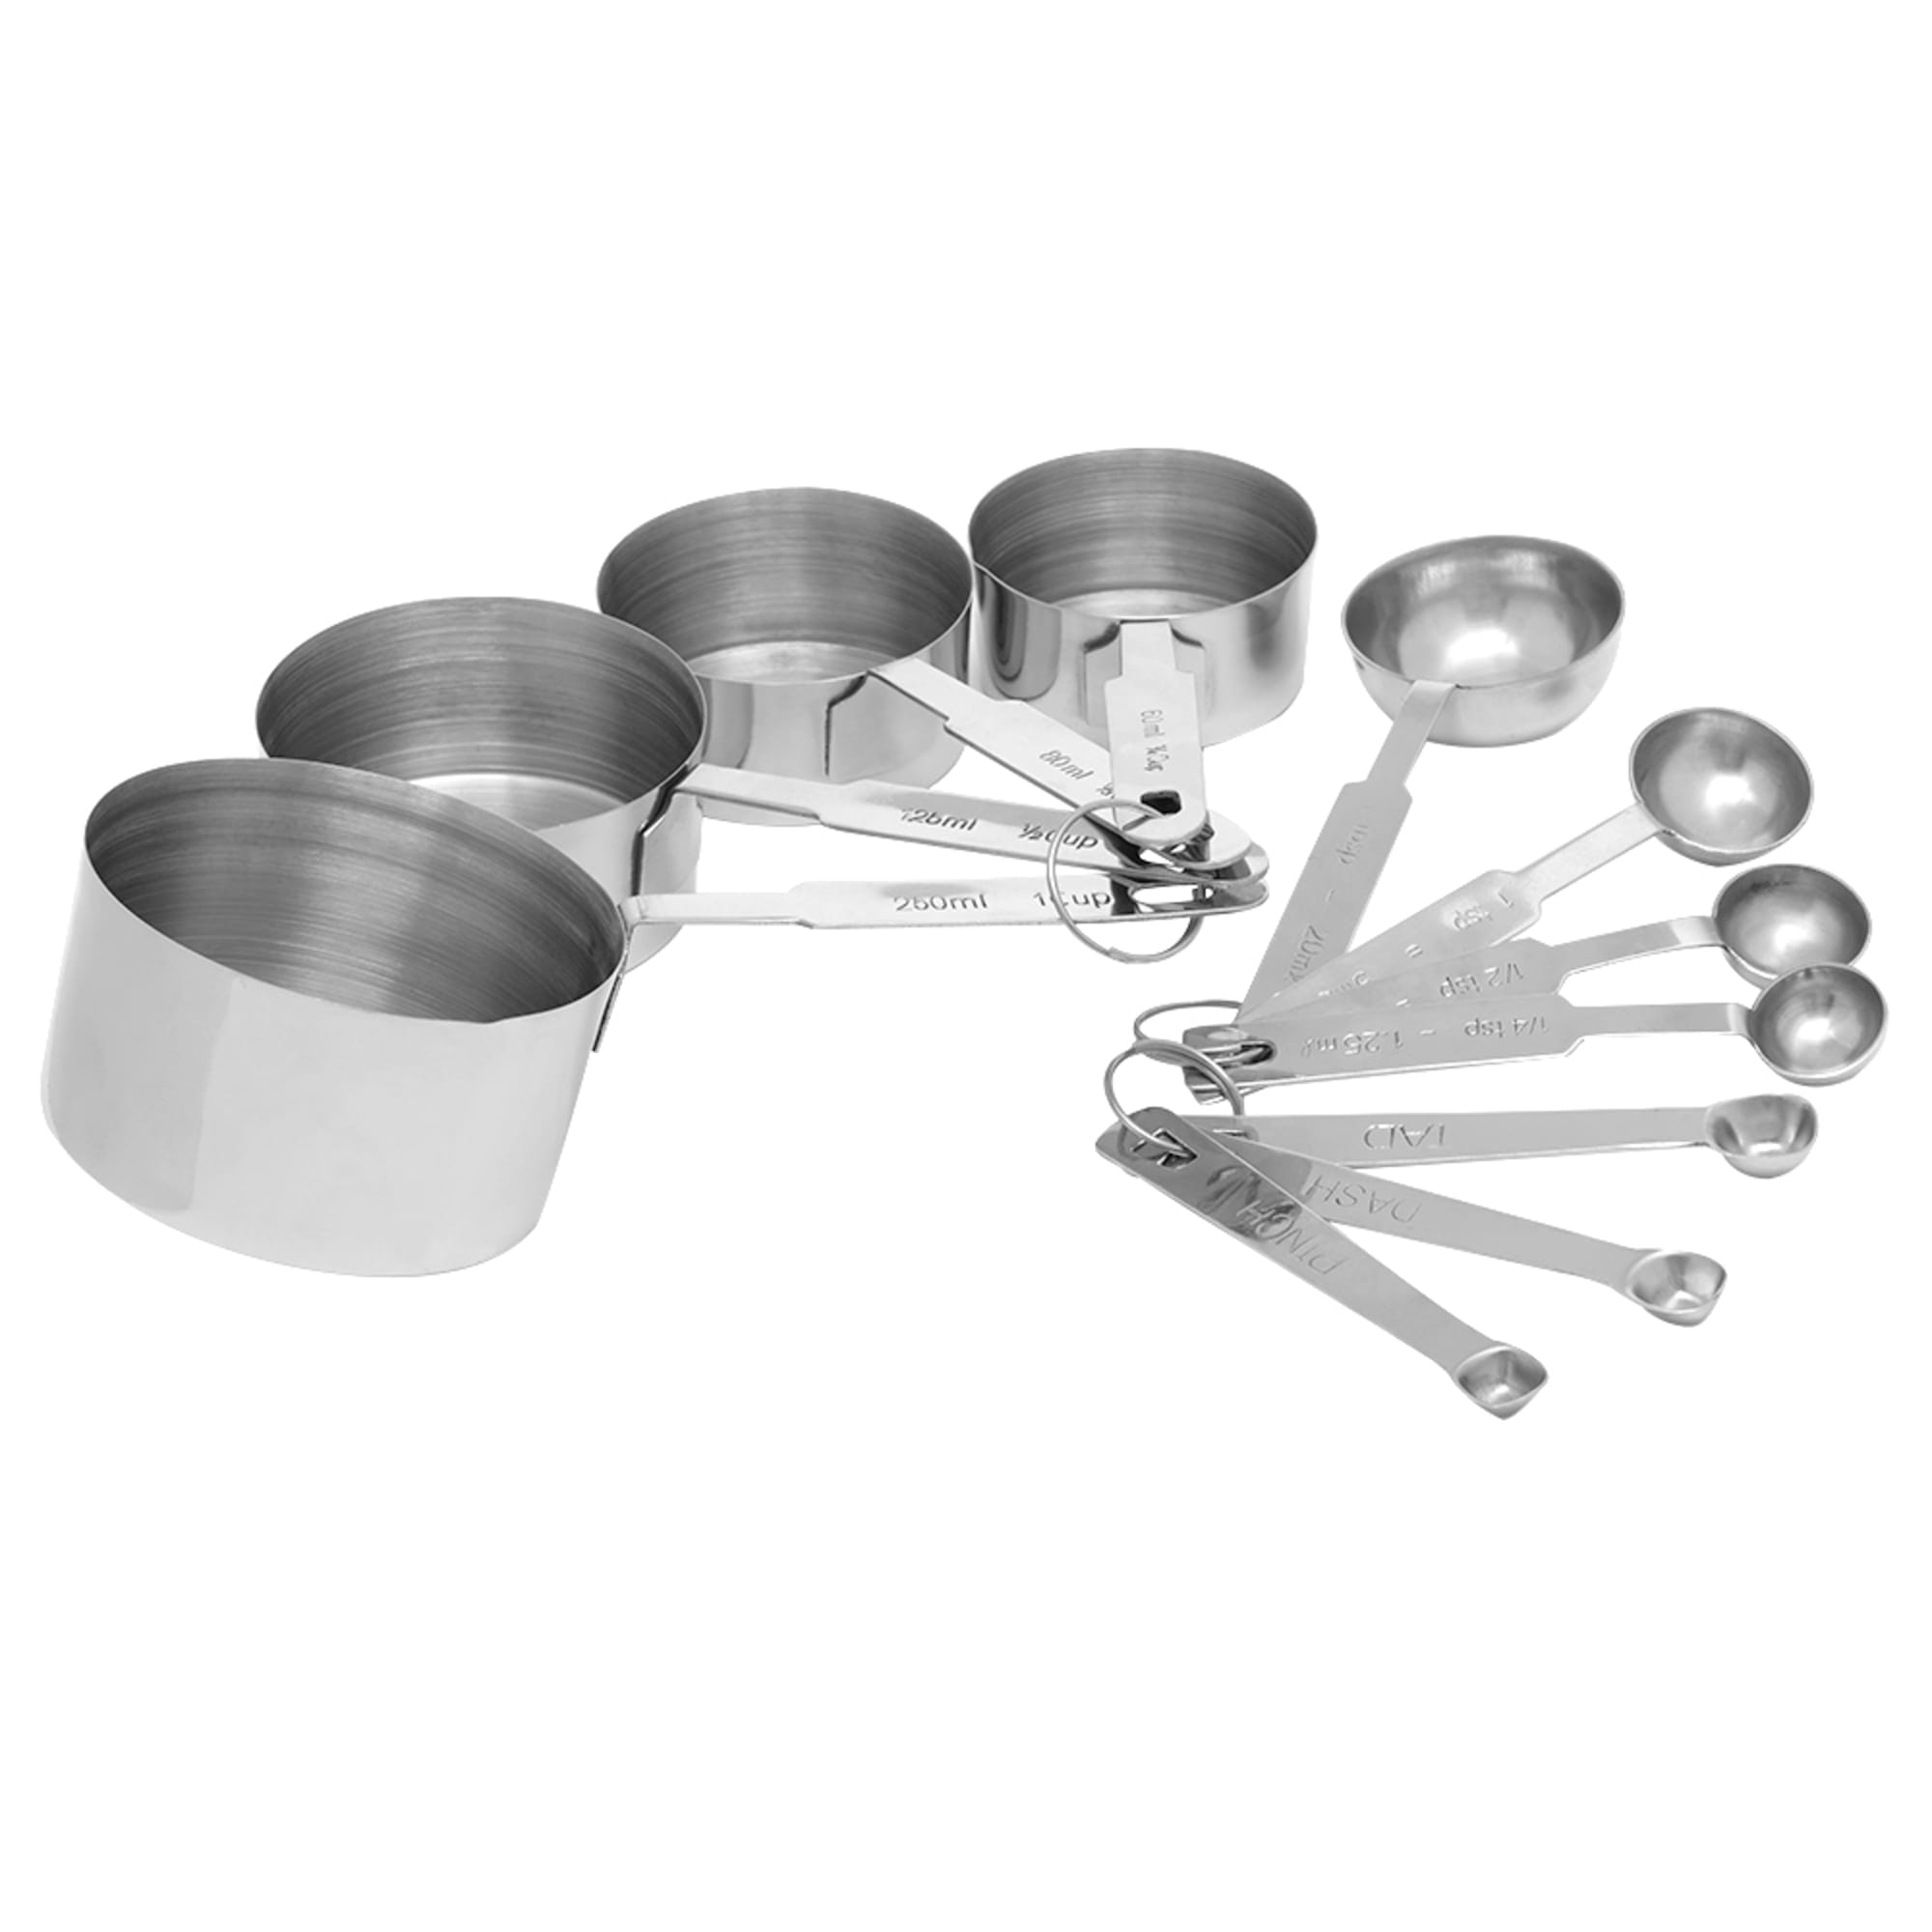 Kitchen/baking Measuring Cups And Spoons - 11 Pieces